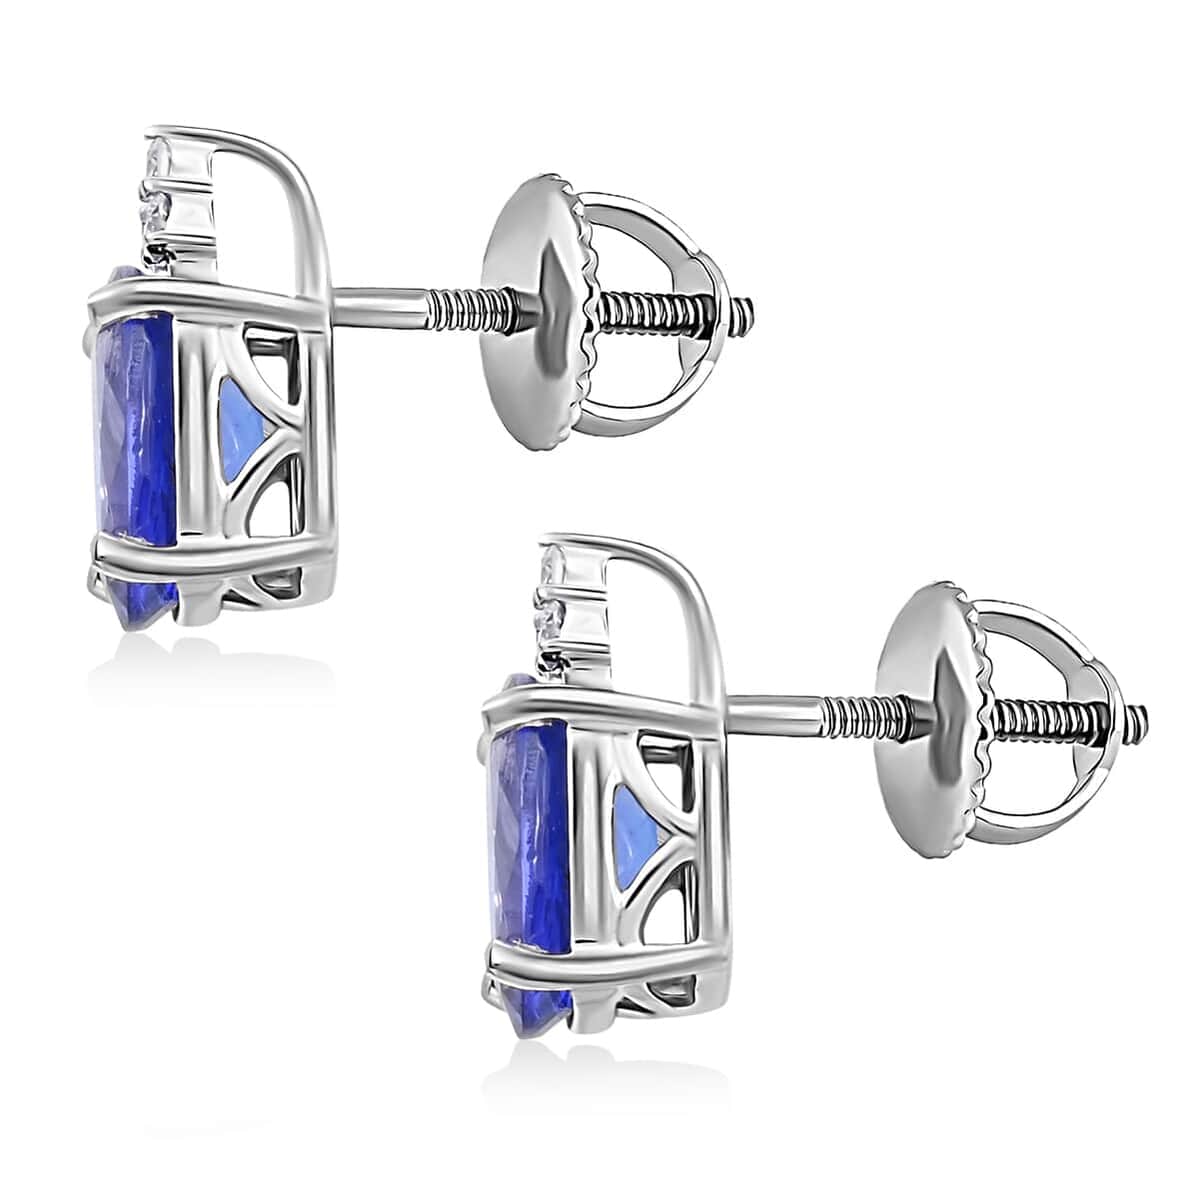 Rhapsody Certified and Appraised AAAA Tanzanite Earrings, E-F VS Diamond Accent Earrings, 950 Platinum Earrings, Tanzanite Gifts For Her  4.15 Grams 3.25 ctw image number 3